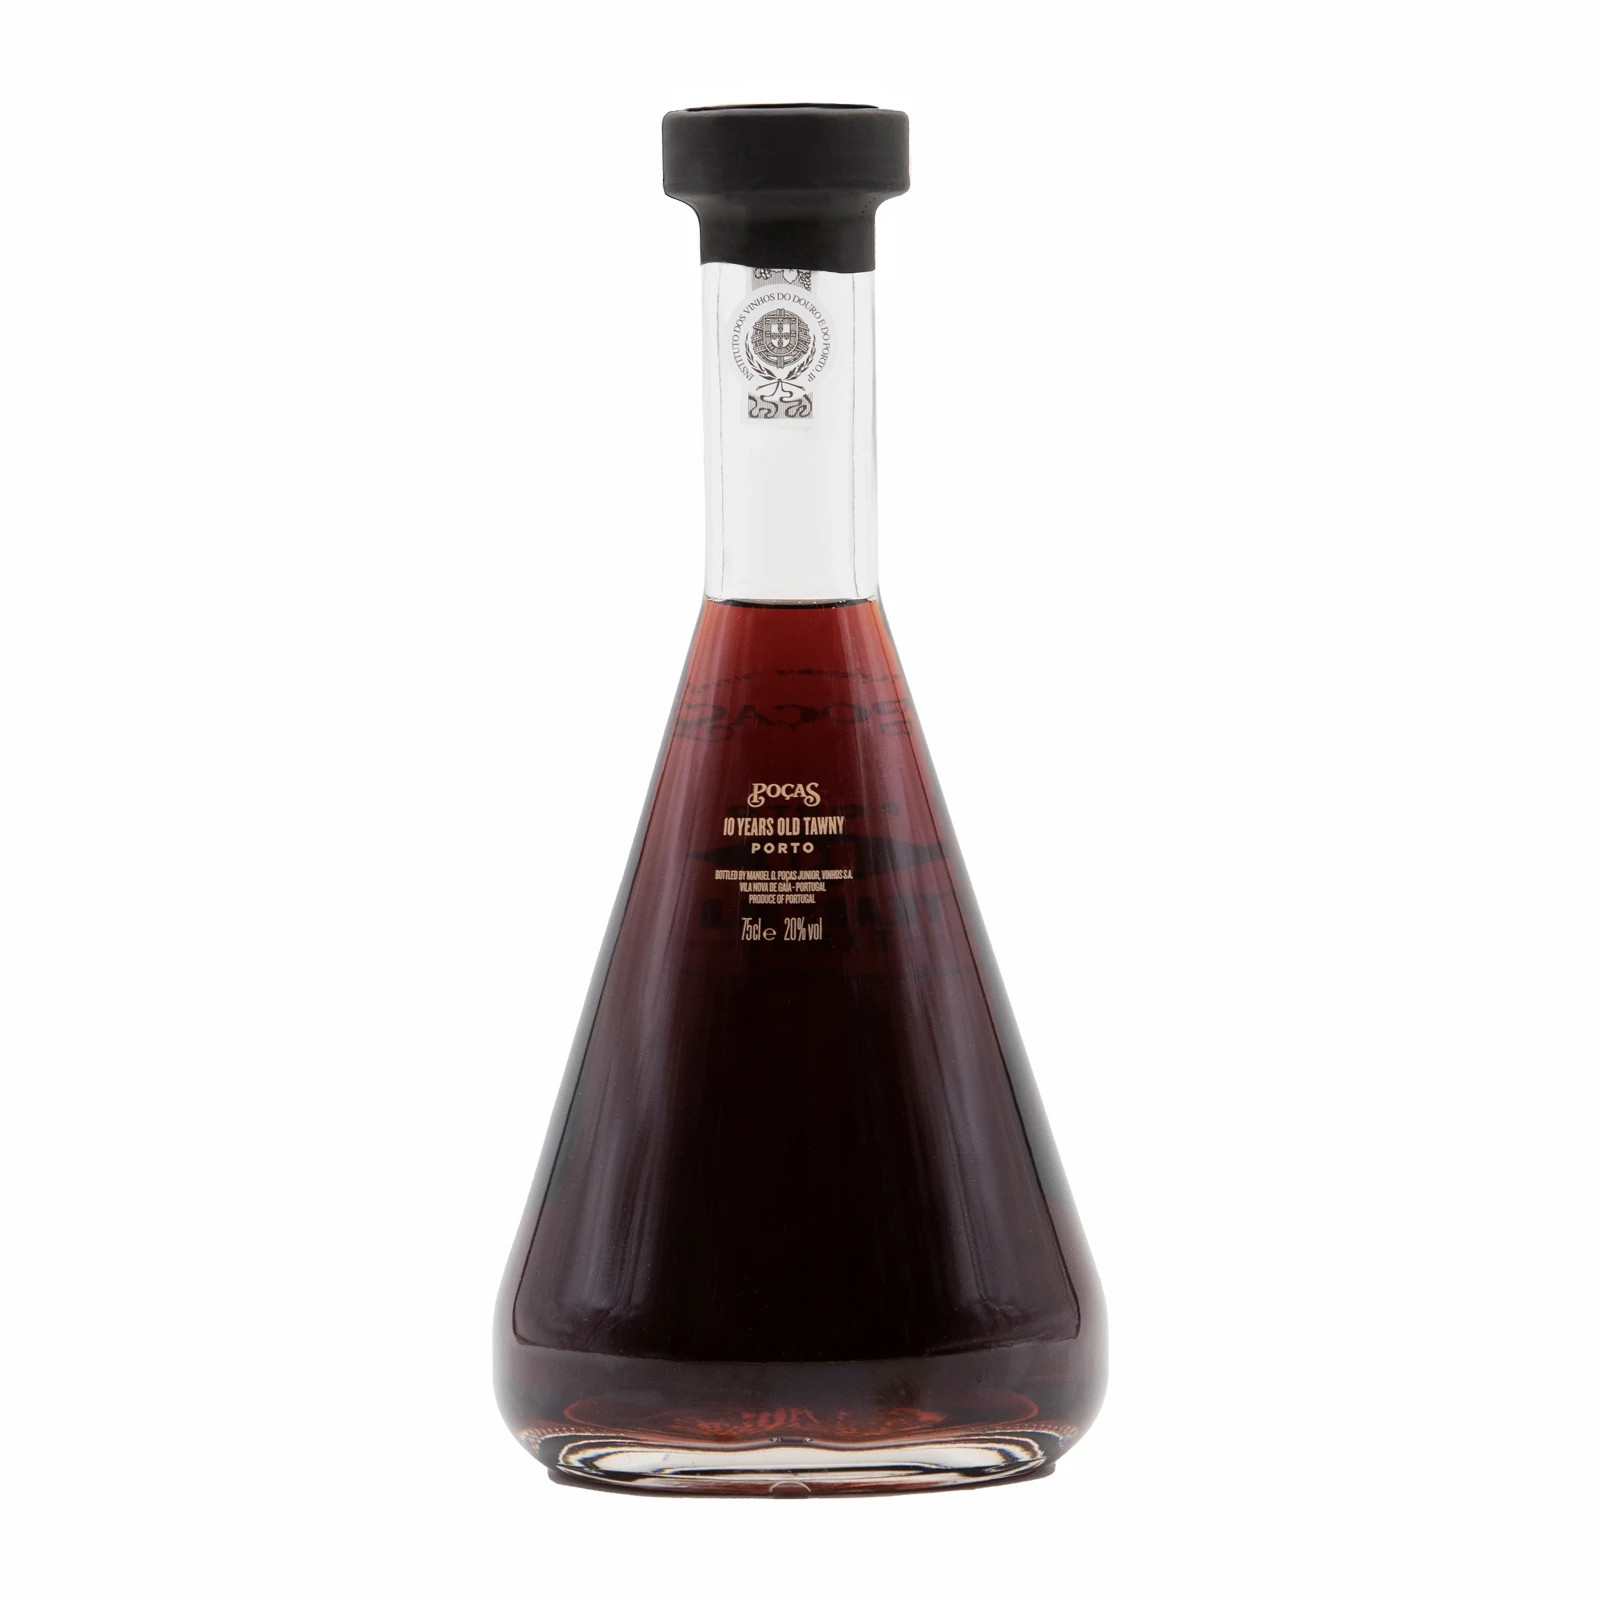 Poças Decanter Old Times 10